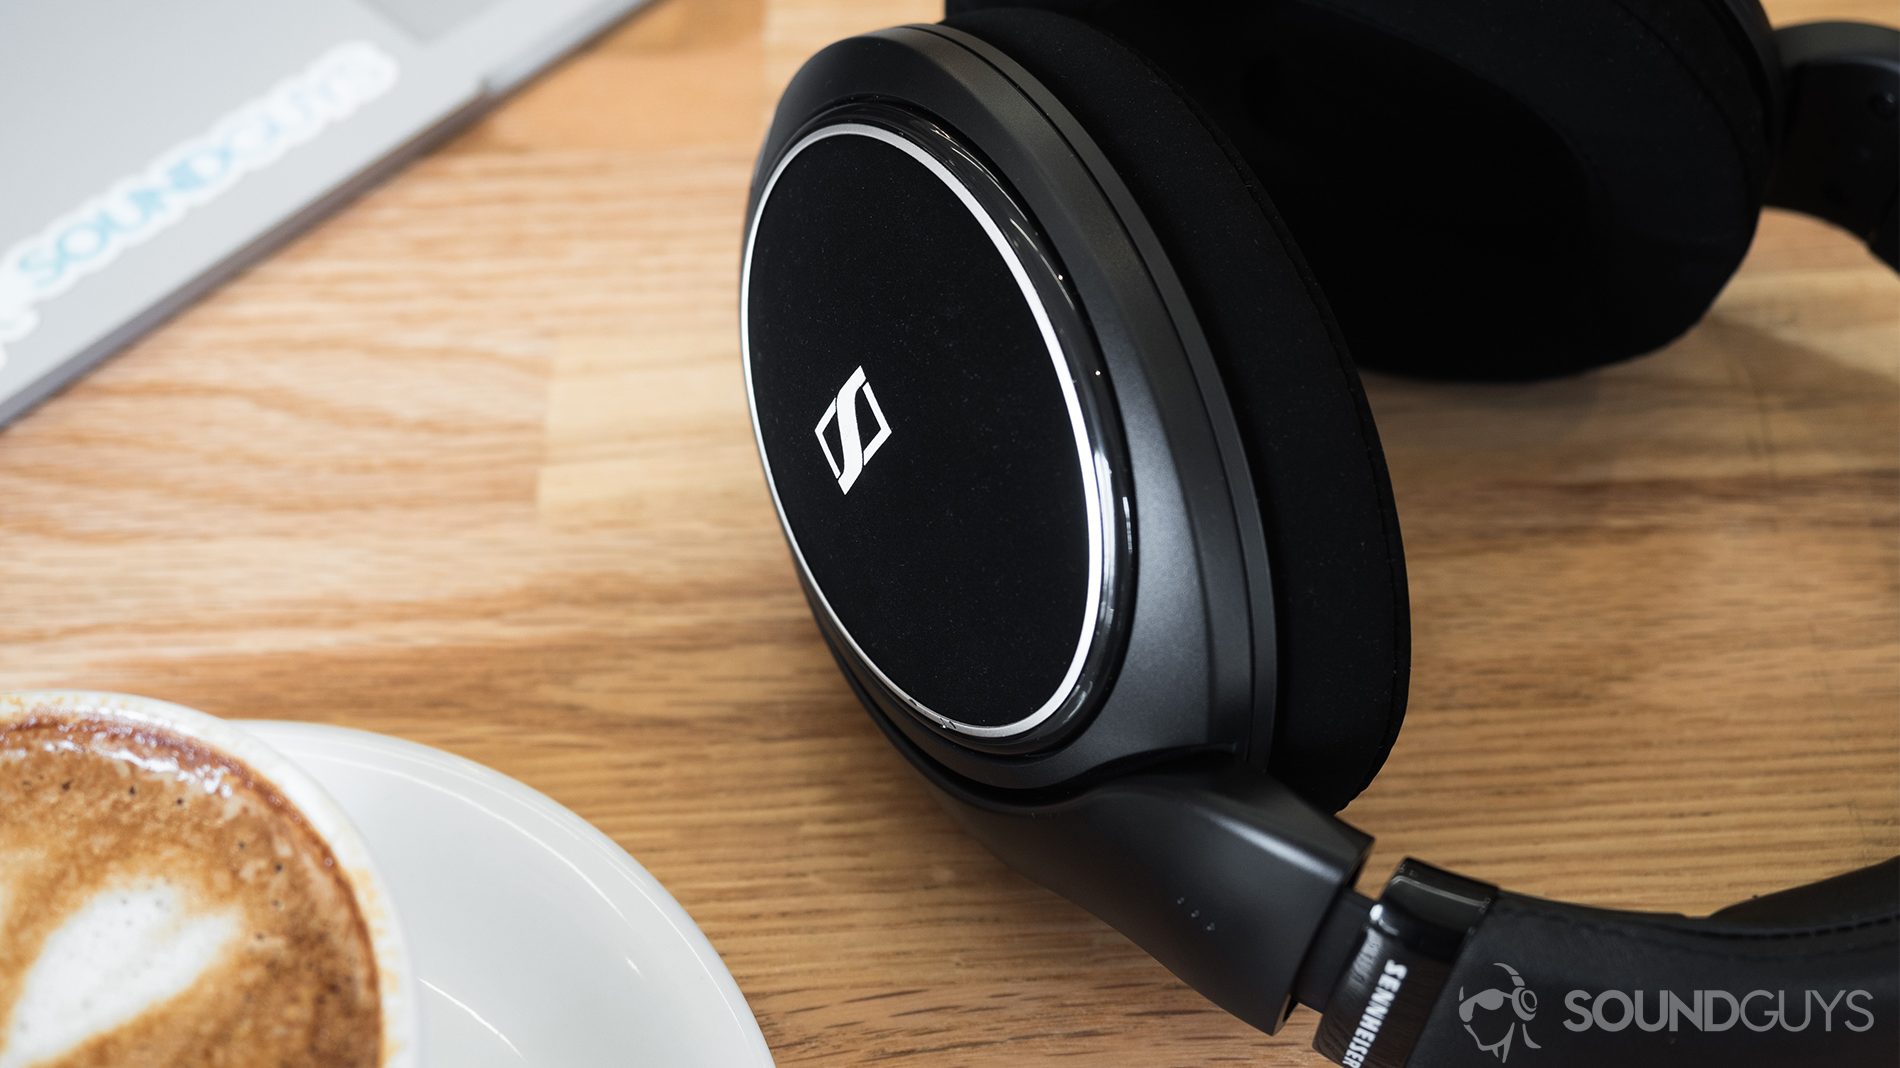 A picture of the Sennheiser HD 598 CS review: A cappucuino in the bottom-left corner of the image, the trackpad portion of a Microsoft Surface Book in the top-left corner, and the headphones taking up the right section of the image.